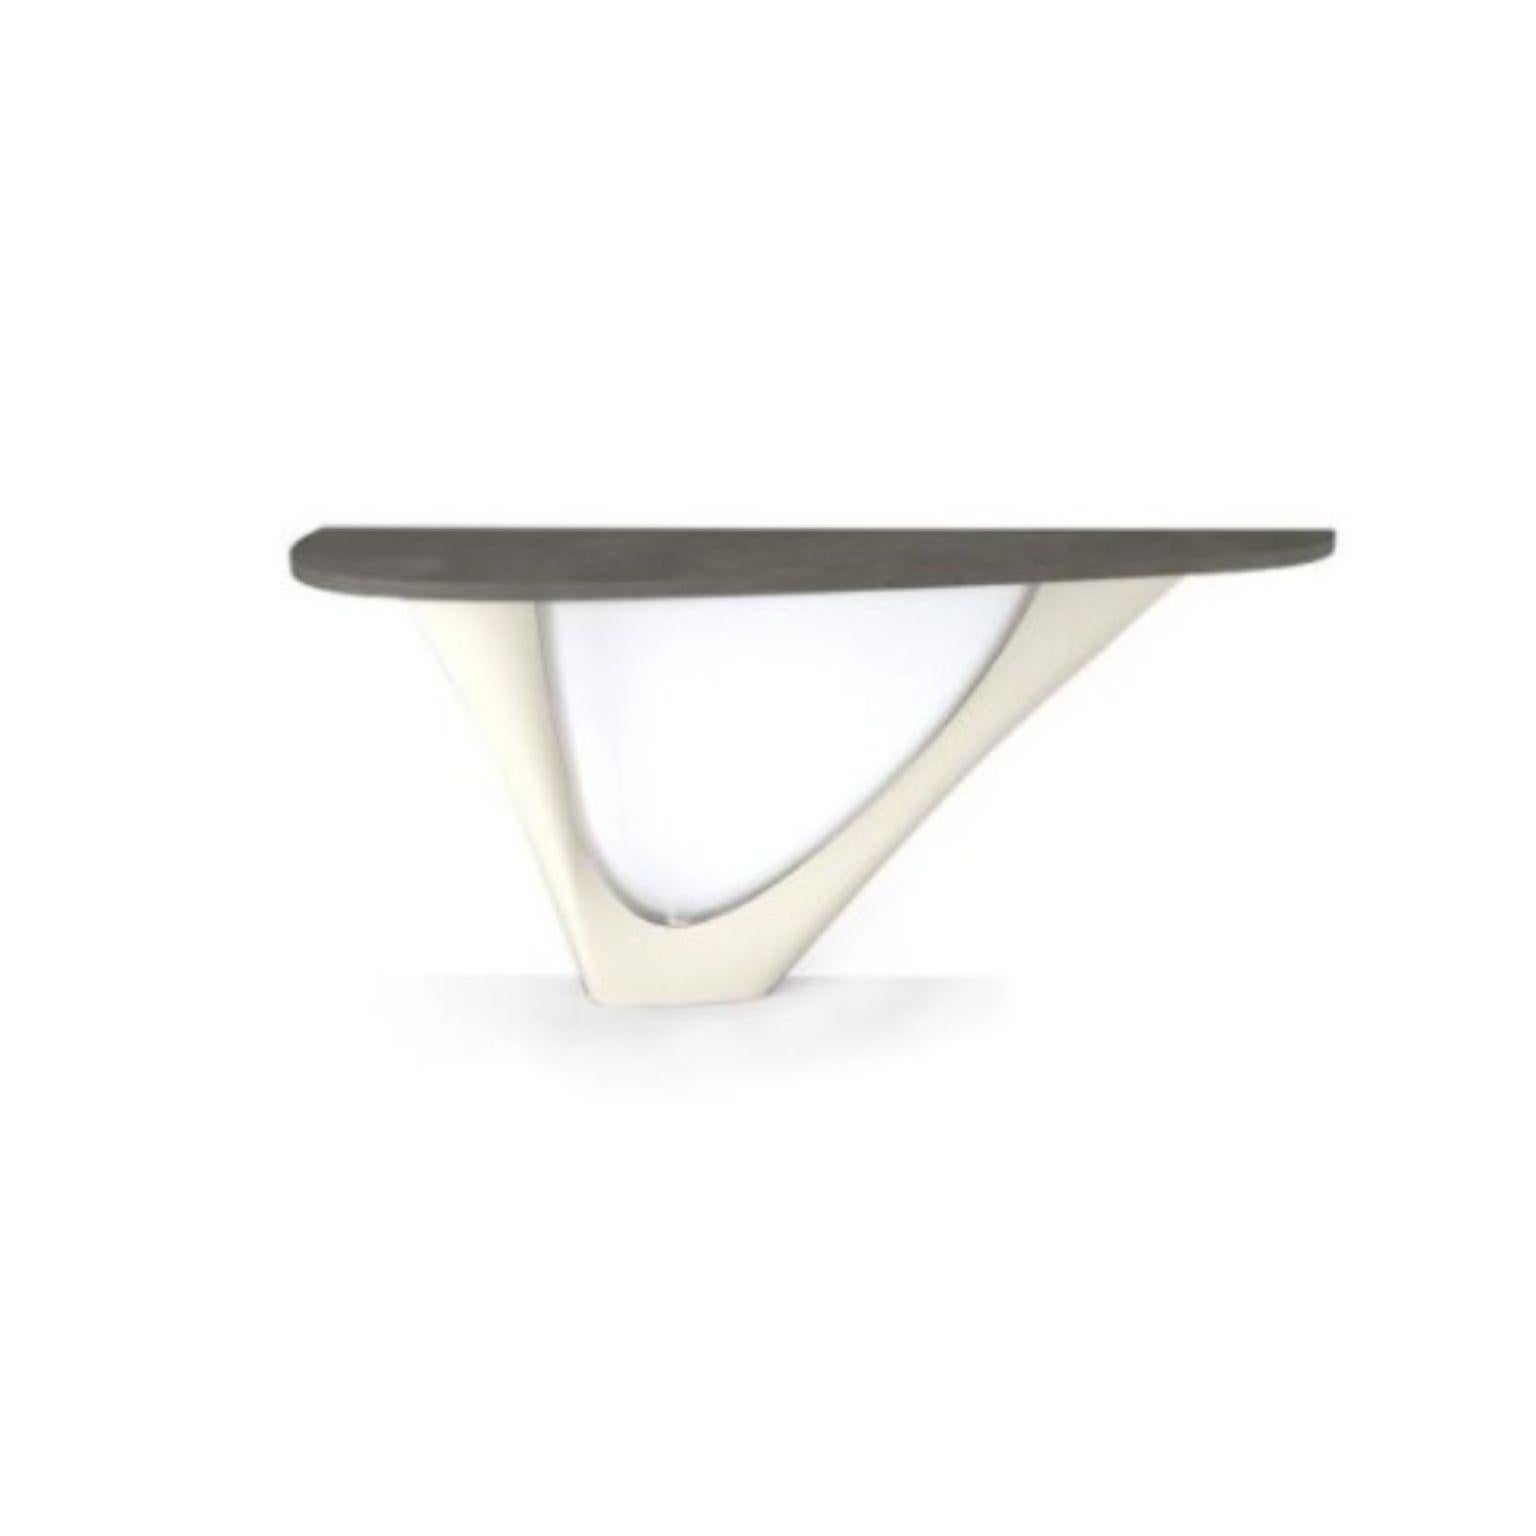 White matt G-console mono steel base with concrete top by Zieta
Dimensions: D 43 x W 159 x H 75 cm 
Material: Concrete, carbon steel.
Also available in different colors and dimensions.

G-Console is another bionic object in our collection. Created